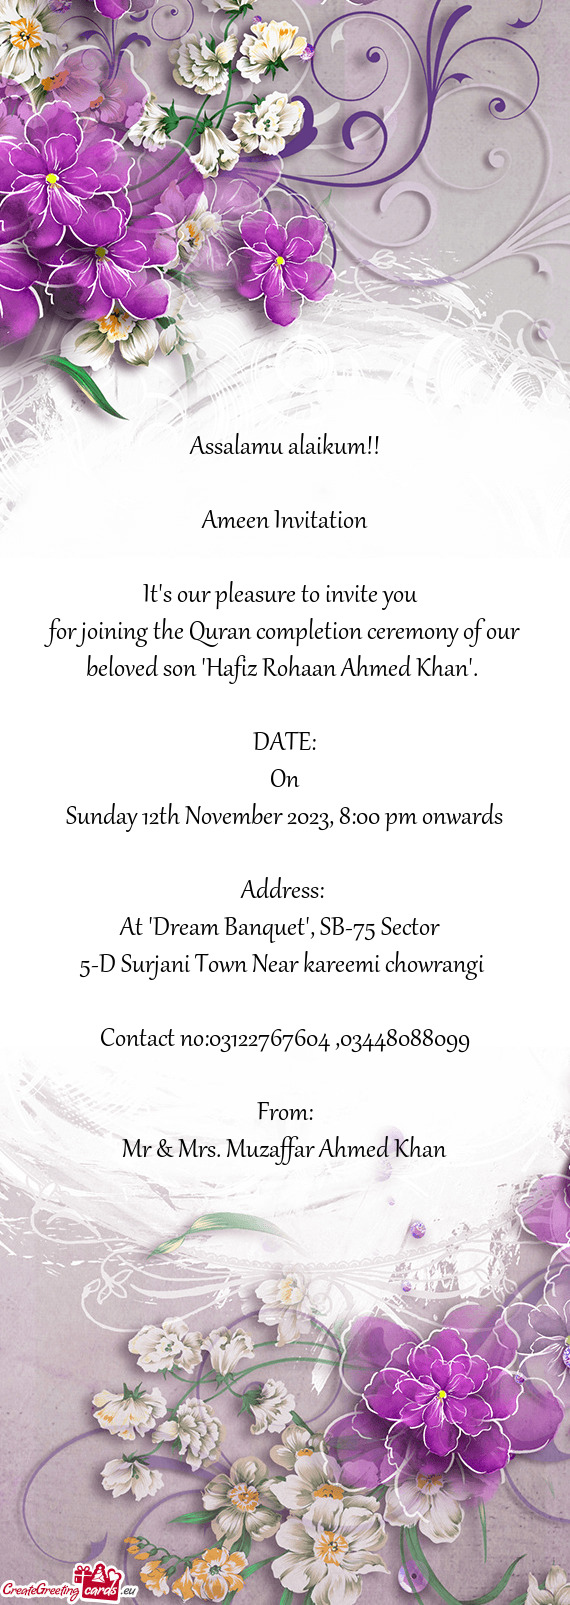 For joining the Quran completion ceremony of our beloved son "Hafiz Rohaan Ahmed Khan"